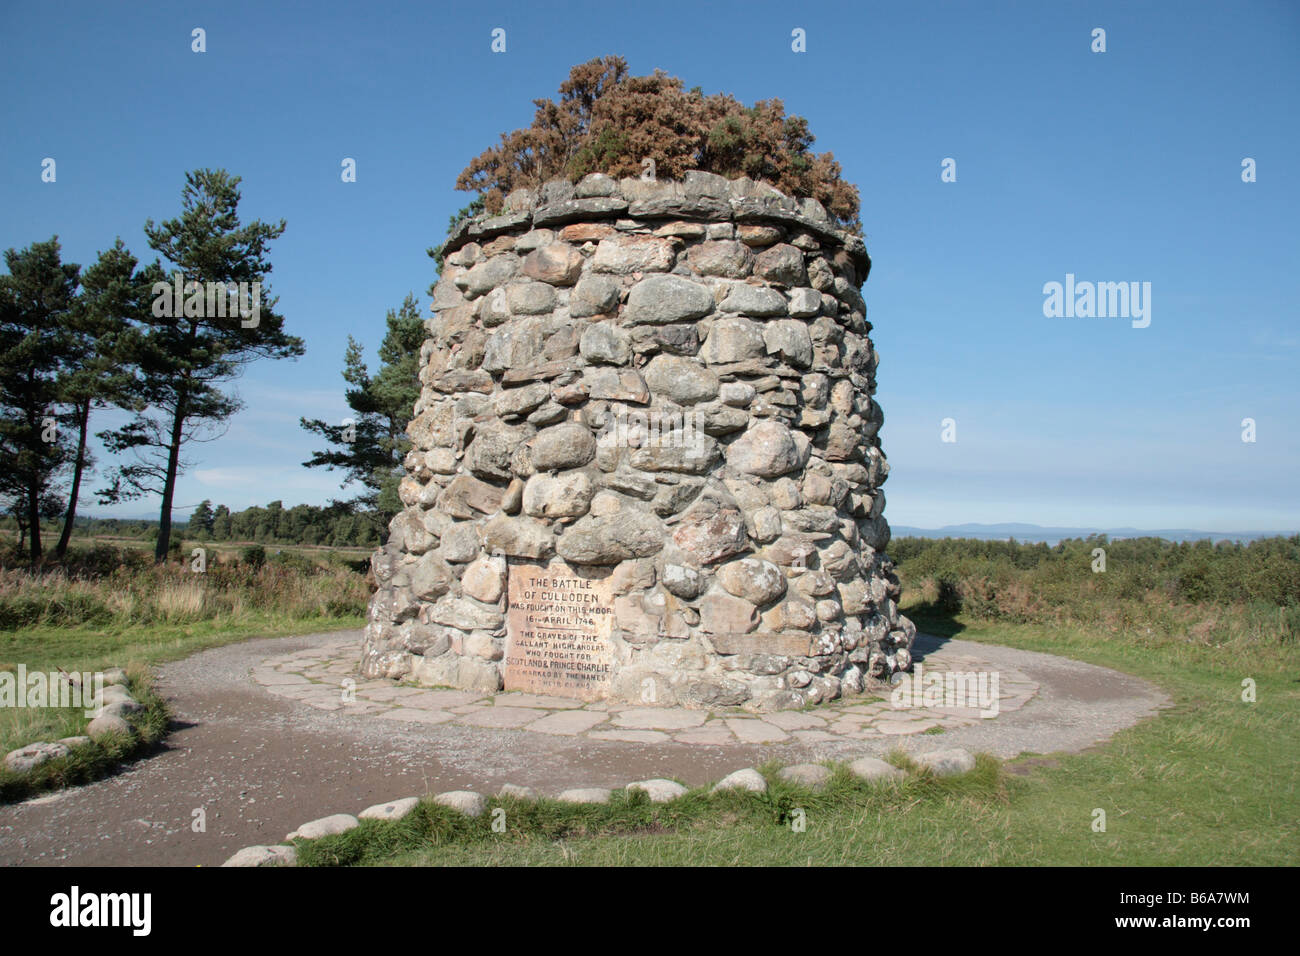 Cairn erected by Duncan Forbes to mark the site of the Battle of Culloden on 16th April 1746 at Drumossie Moor Stock Photo